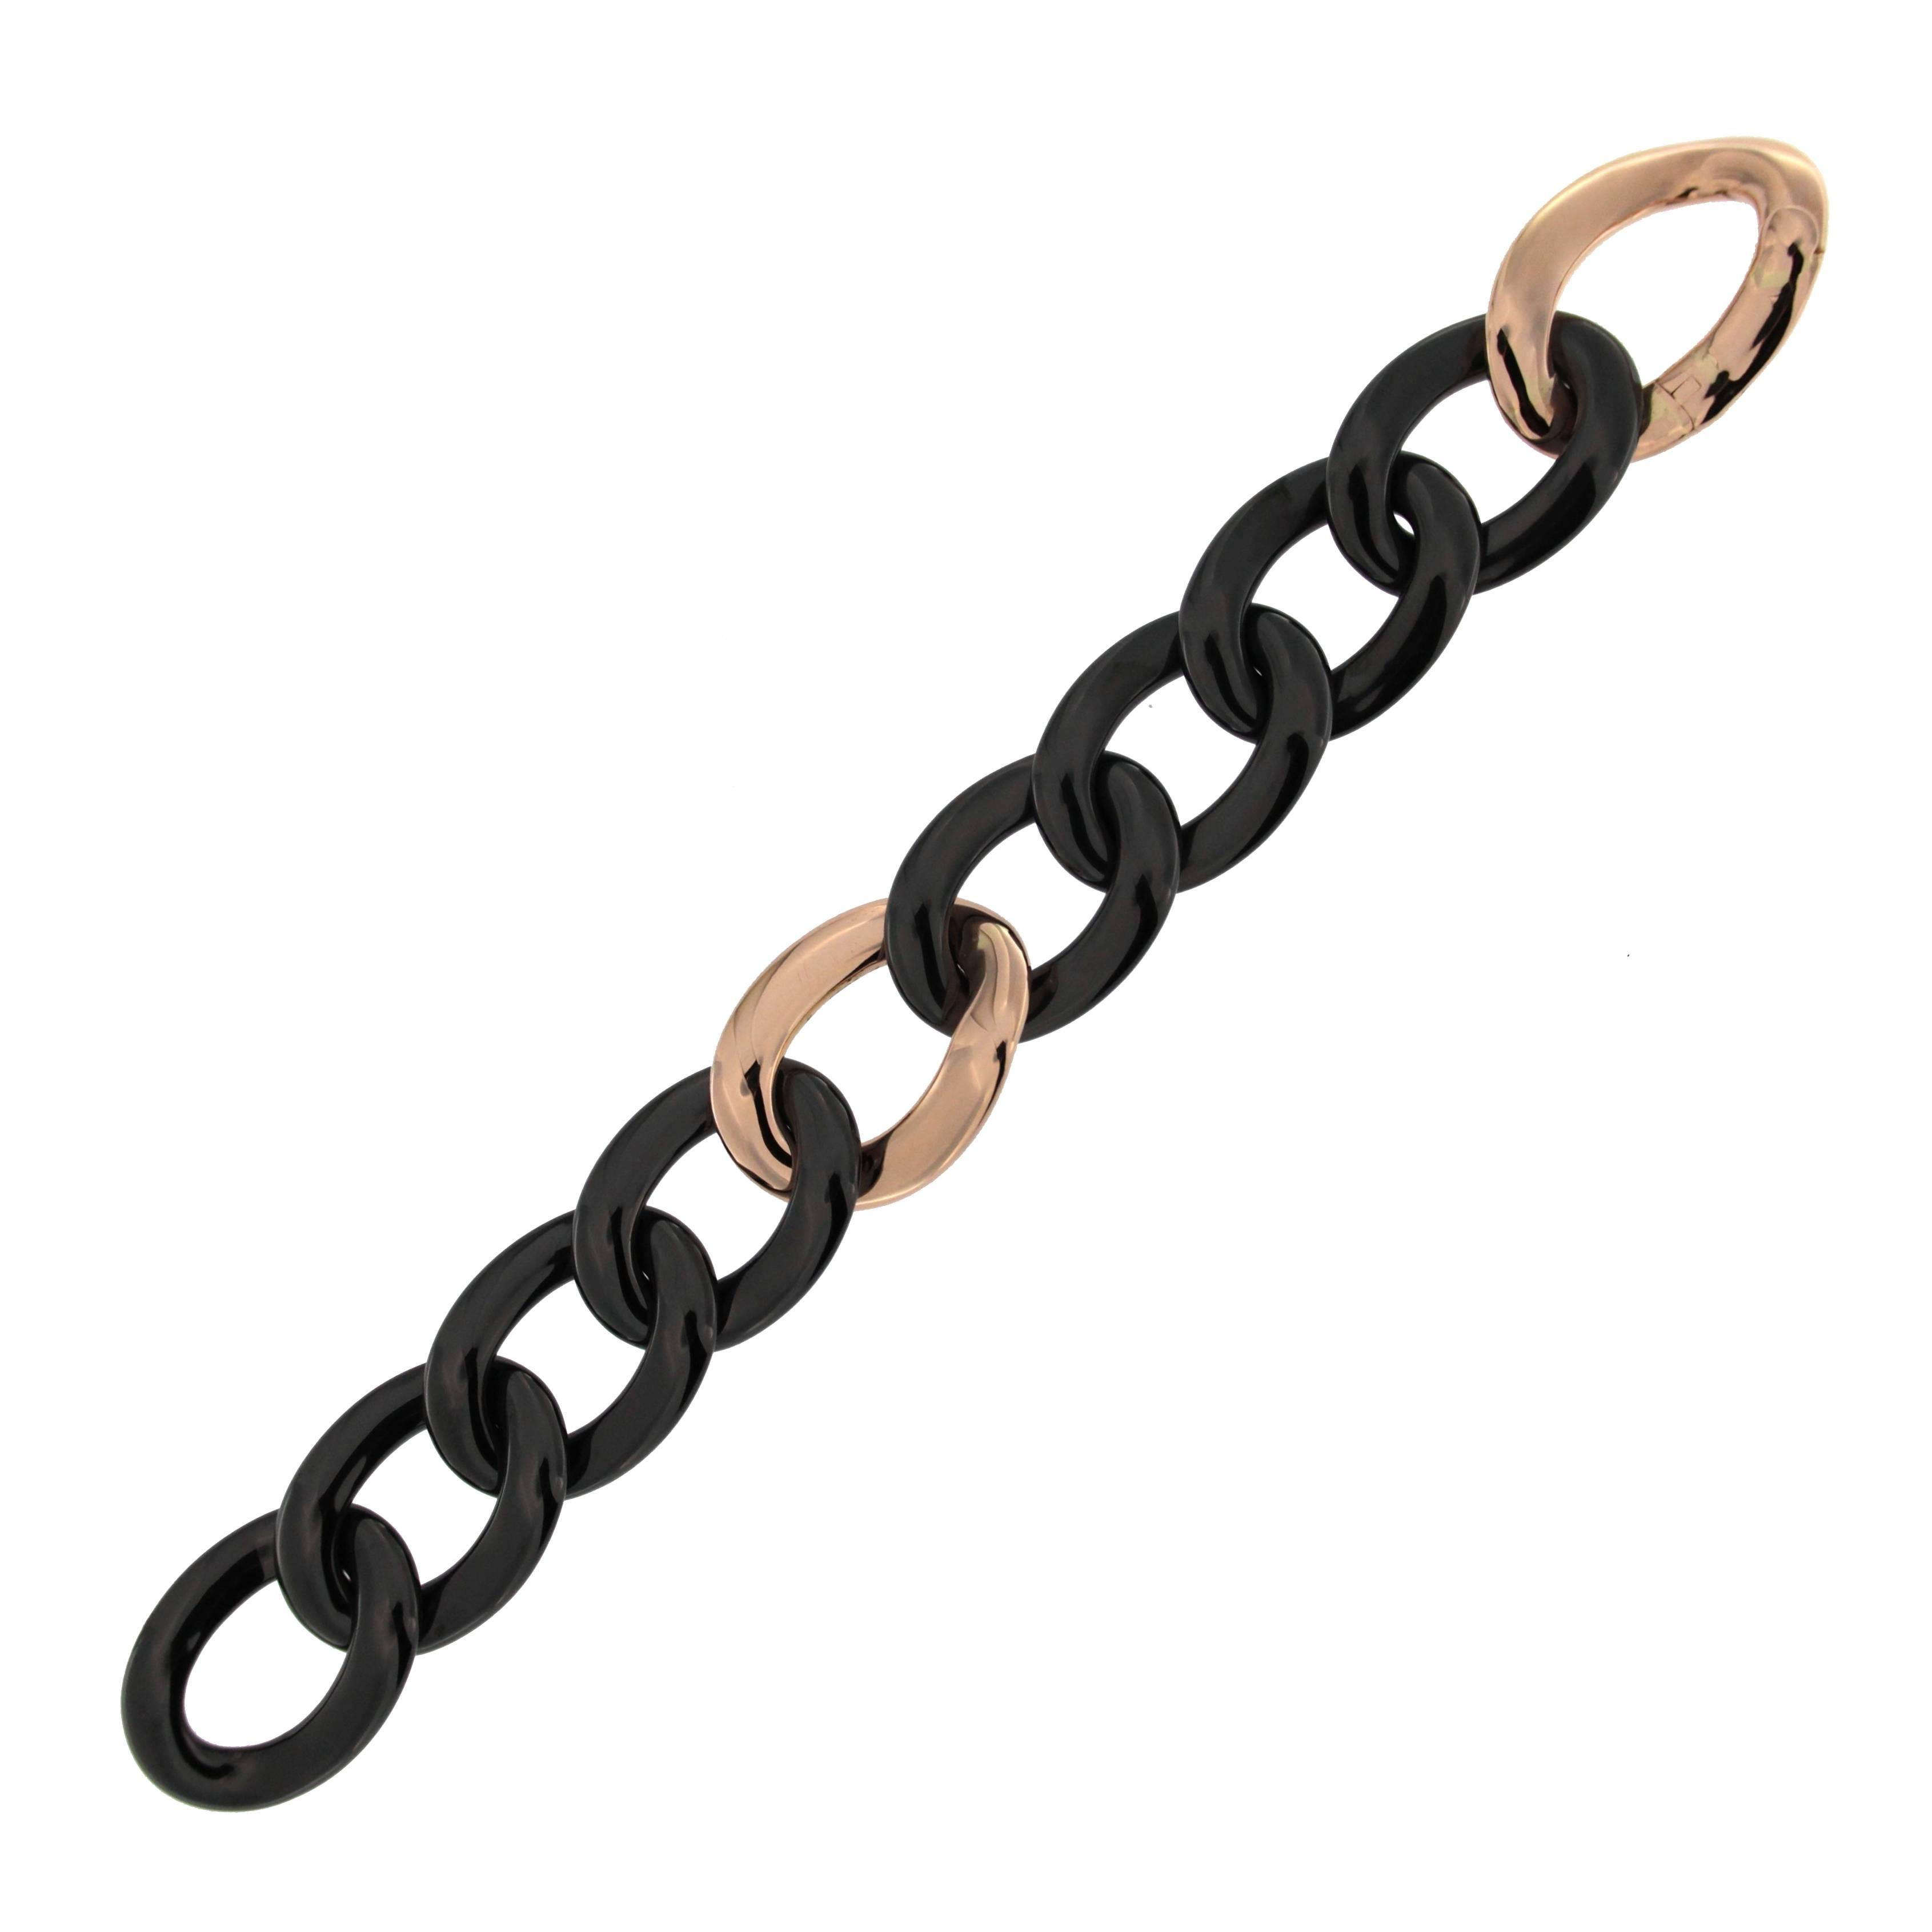 Jona design collection, hand crafted 18k rose gold and black high-tech
ceramic curb-link bracelet.
Dimensions :  L x 7.28 in, W x 2.5 in - L x 184.9 mm , W x 63.5 in.
With a hardness approaching that of diamond, high-tech ceramic is a